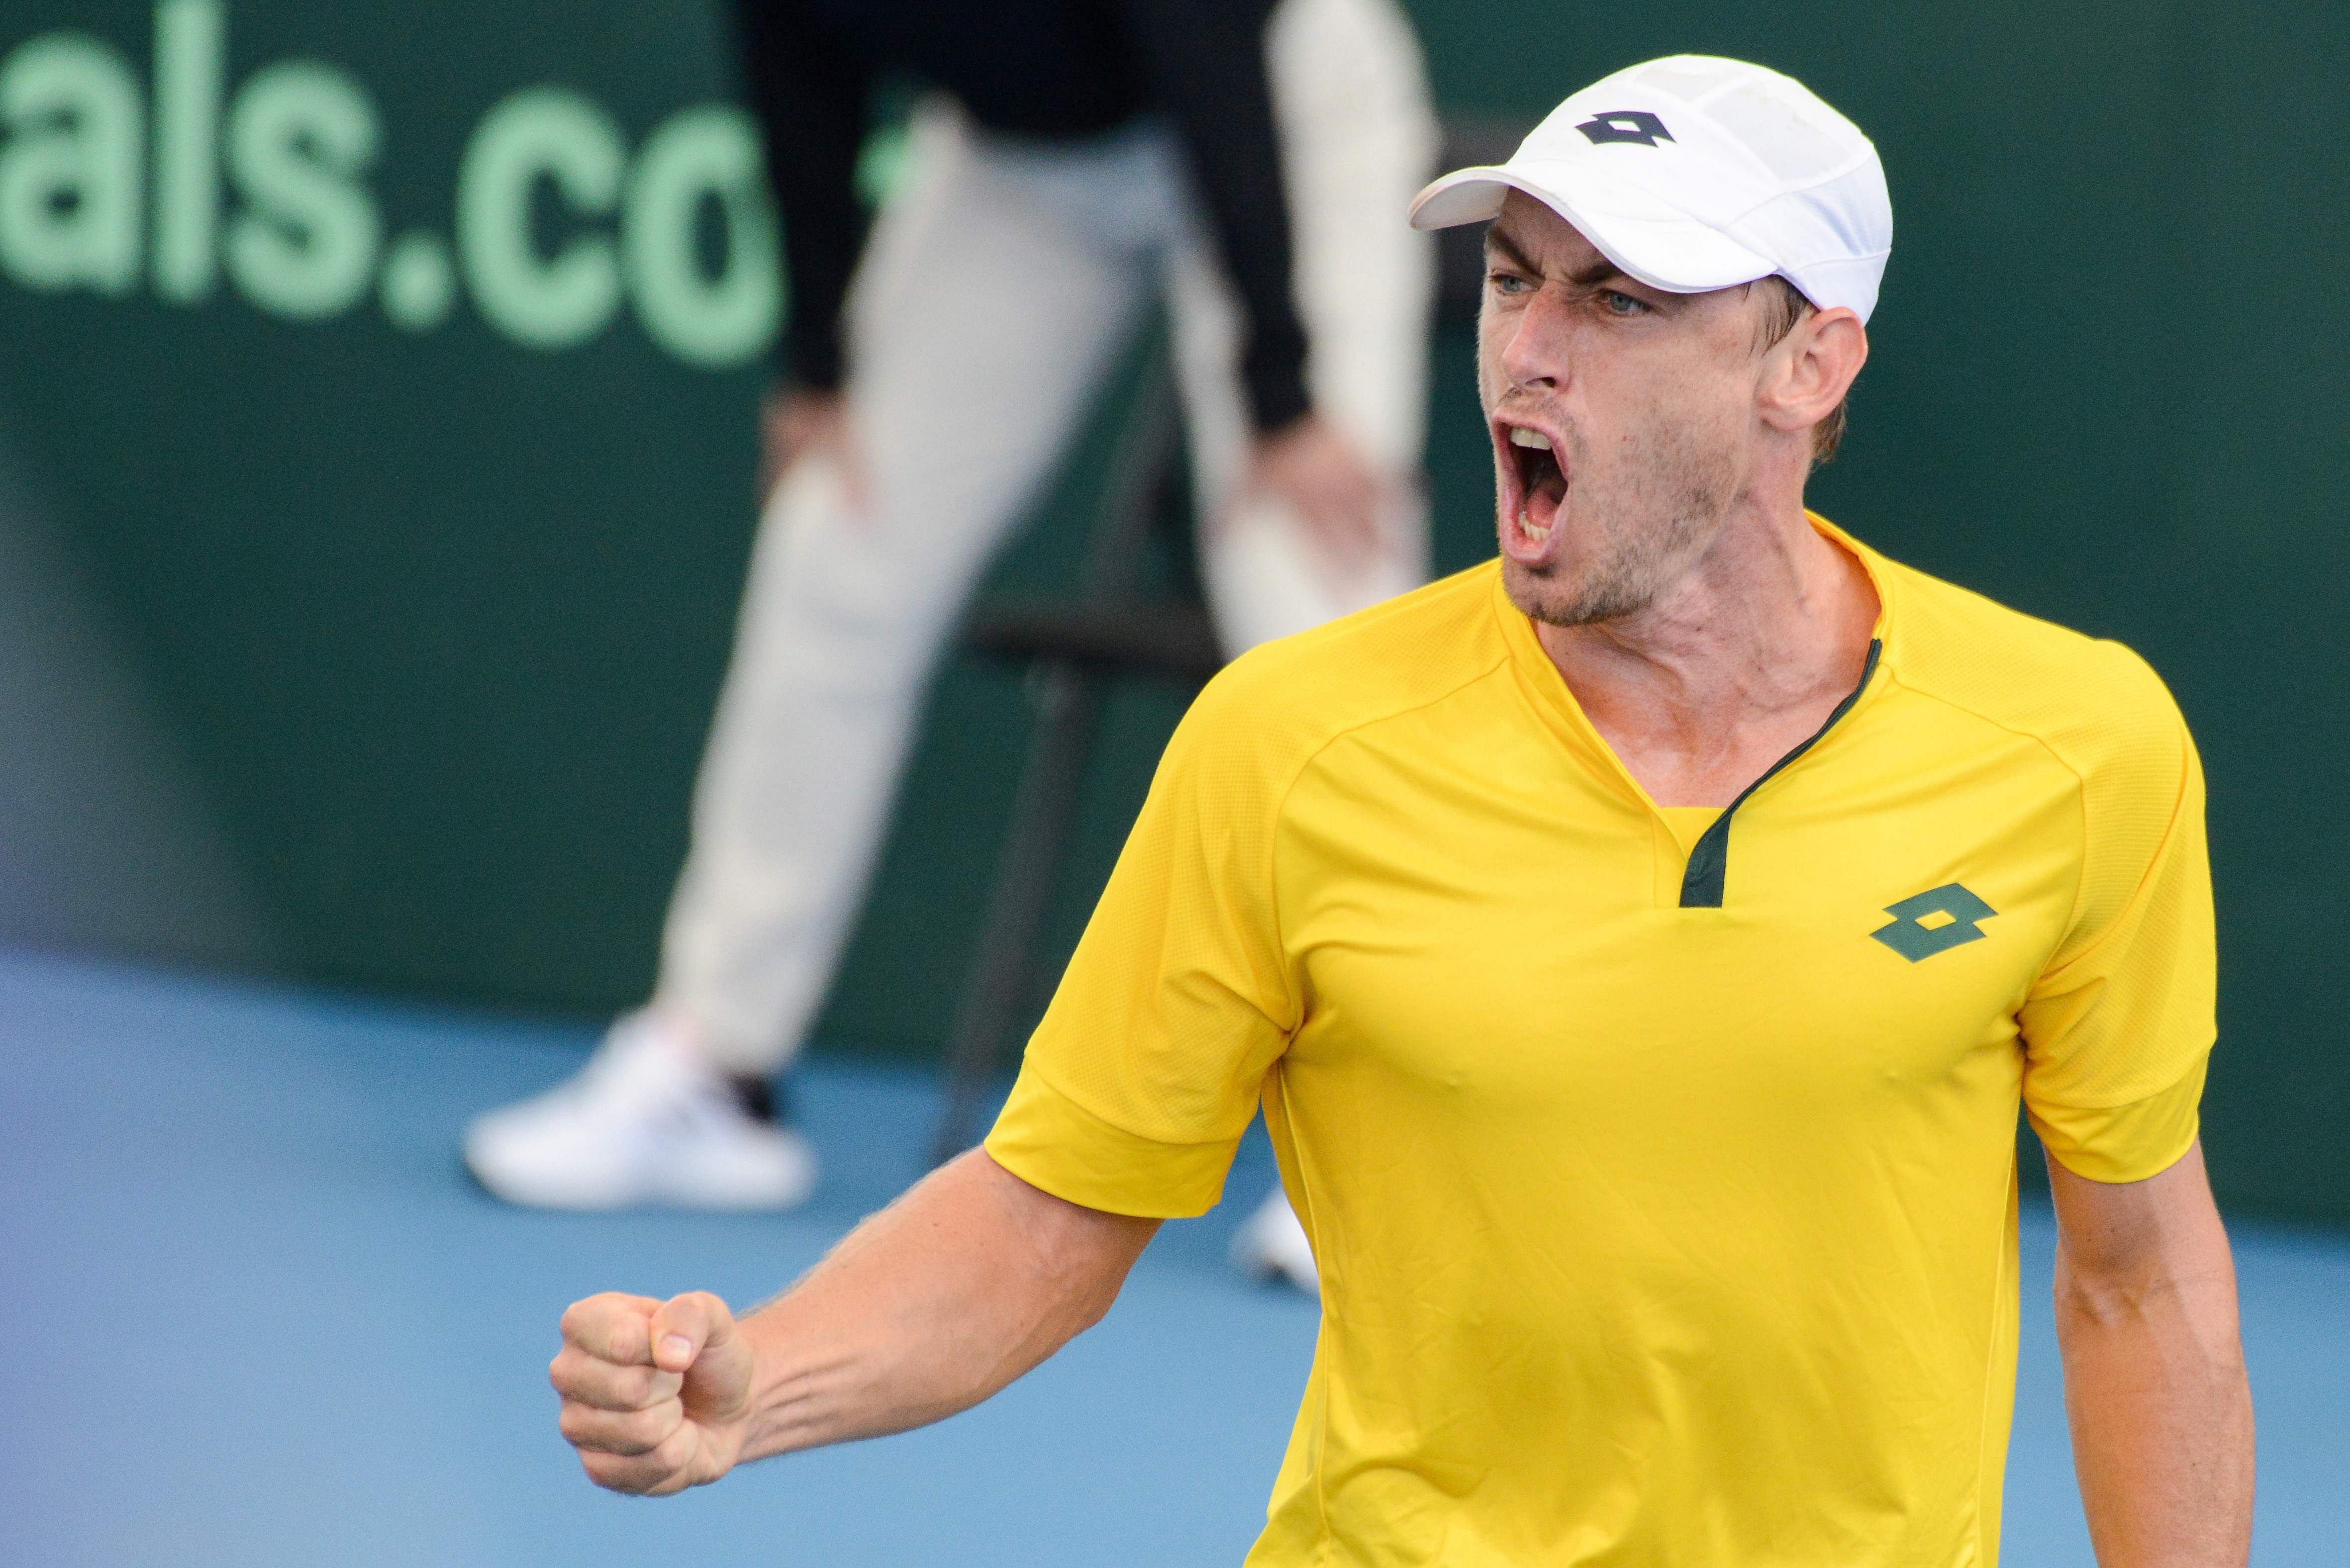 John Millman of Australia reacts to winning a point during his Davis Cup qualifying tie tennis match against Brazil in Adelaide on March 6, 2020. Credit: AFP Photo